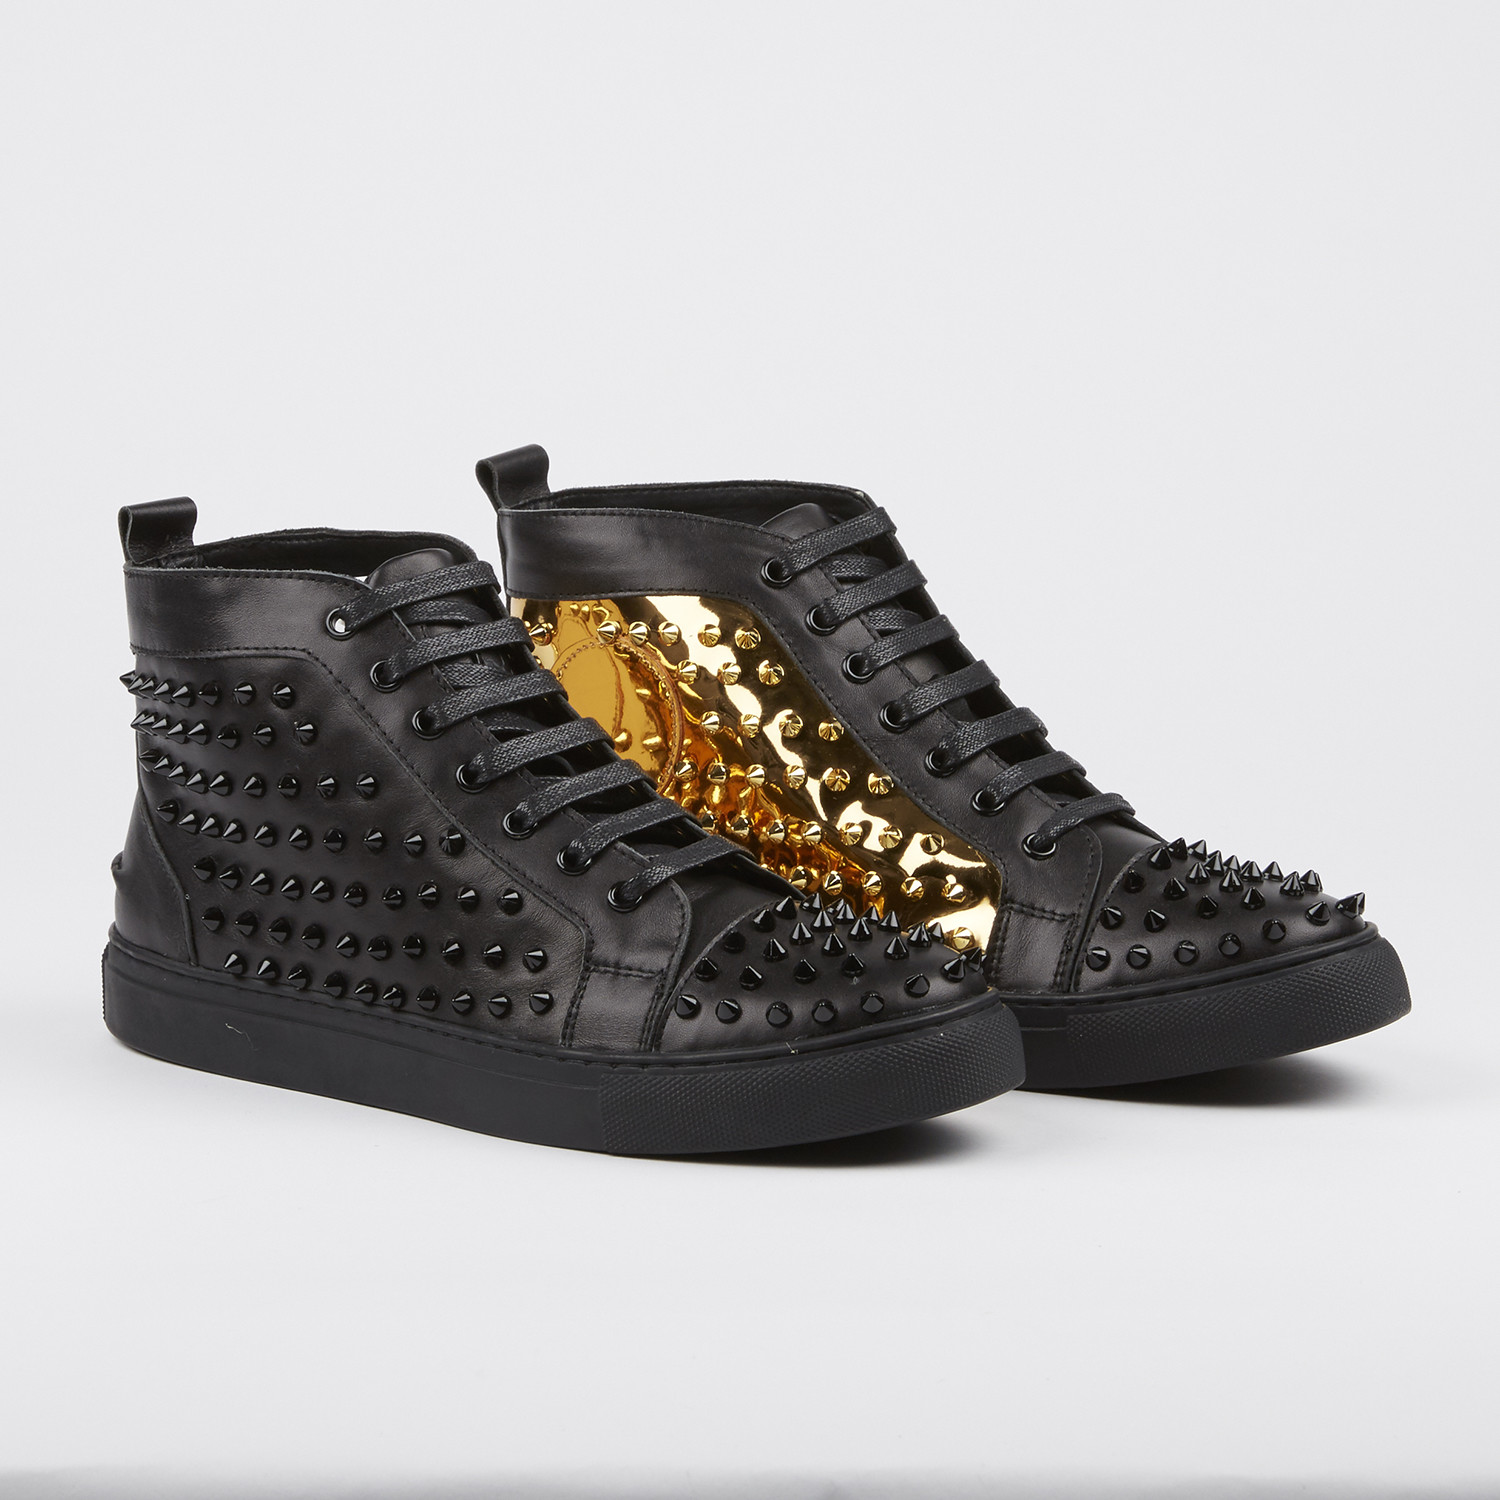 studded high tops off 51% - axnosis.co.uk